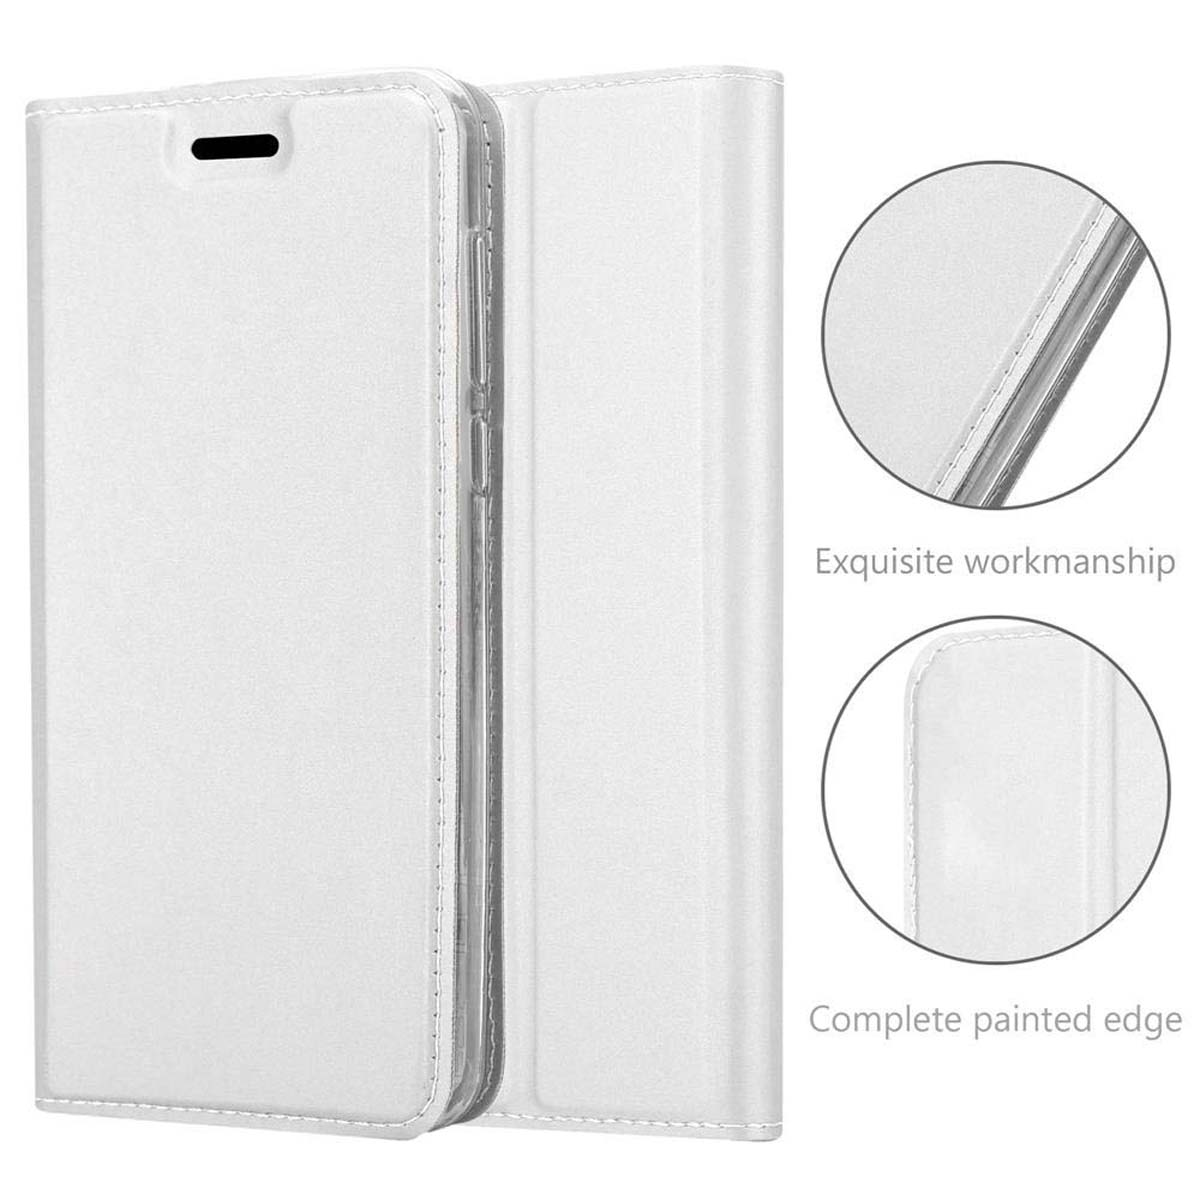 Huawei, Handyhülle CADORABO Style, CLASSY Bookcover, Classy SILBER Book P8,